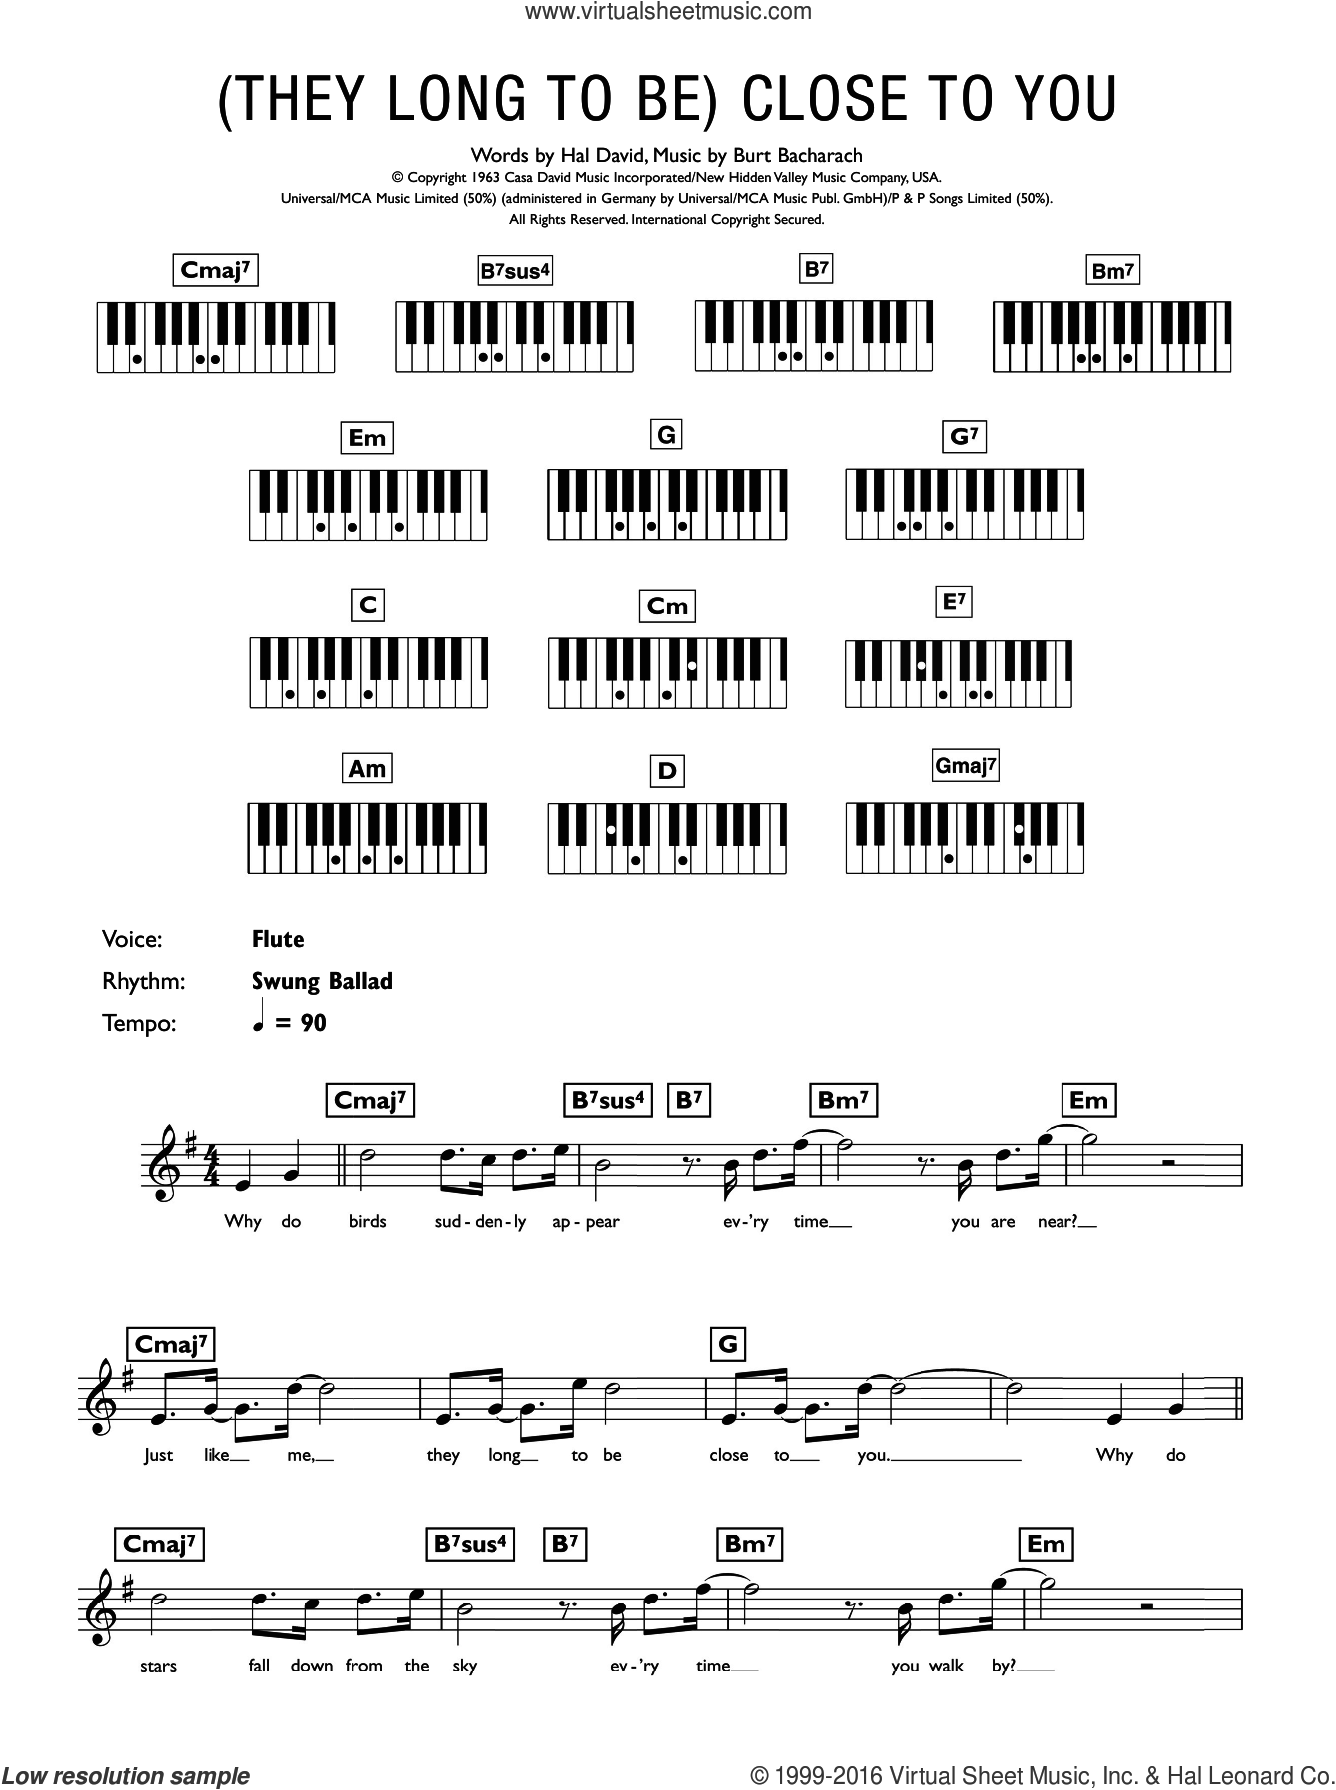 Carpenters - Close To You (They Long To Be) sheet music for piano ...